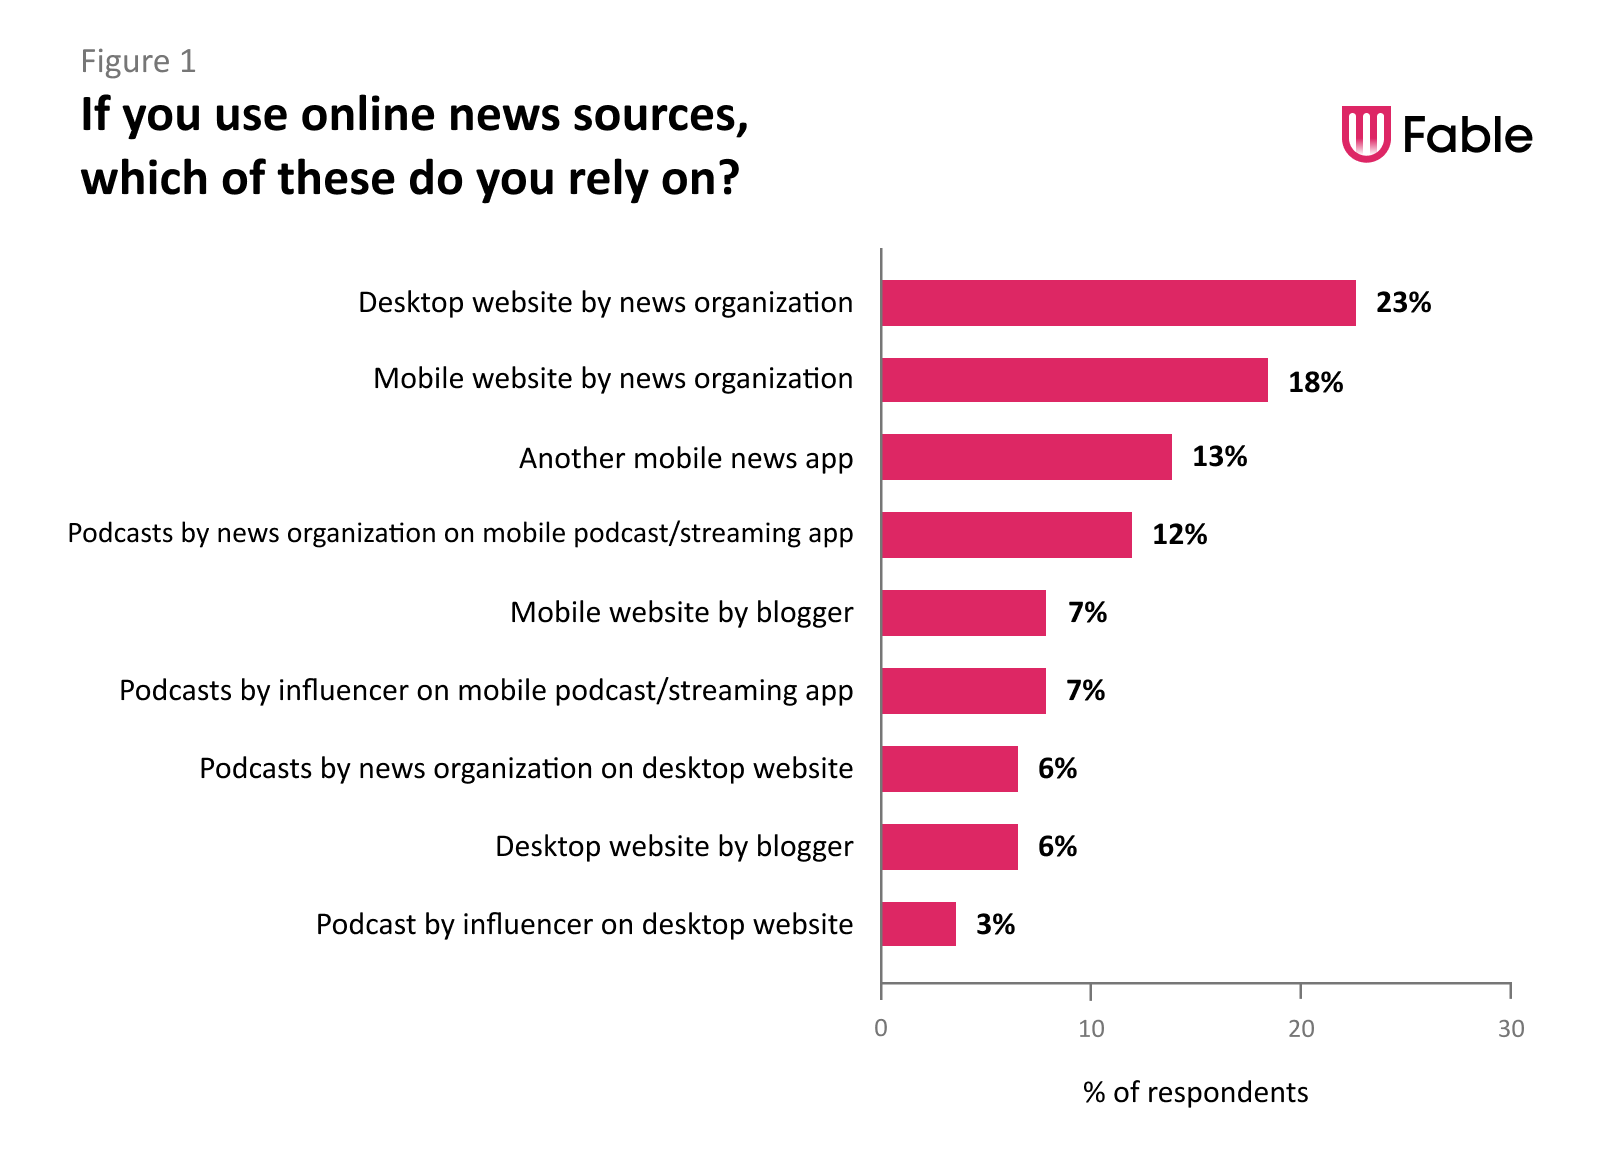 a bar-graph with caption “If you use online news sources, which of these do you rely on?” showing the following data: Desktop website published by a news organization: 23% Mobile website published by a news organization: 18% Another mobile news app (e.g. Apple News): 13% Podcast episodes published by a news organization through a mobile podcast or streaming app (e.g. Spotify, Apple Podcasts): 12% Mobile website for a blogger that interests me: 7% Podcast episodes published by an influencer that interests me through a mobile podcast or streaming app (e.g. Sirius XM, Spotify): 7% Podcast episodes published by a news organization through a desktop website interface: 6% Desktop website for a blogger that interests me: 6% Podcast episodes published by an influencer through a desktop website interface: 3%